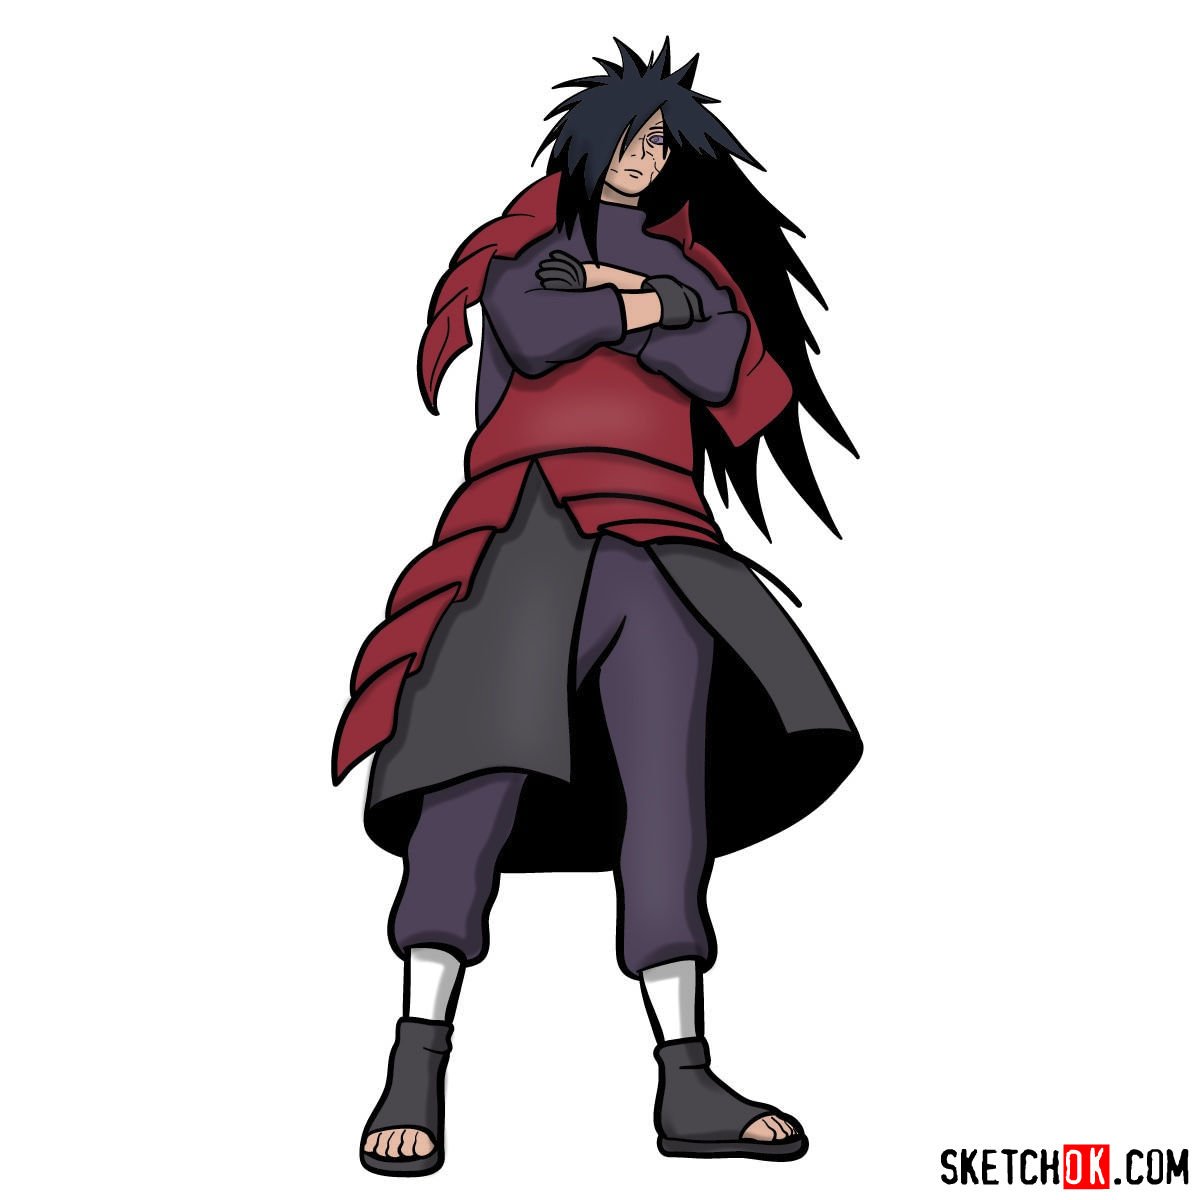 How to draw Madara Uchiha from Naruto anime - Sketchok easy drawing guides